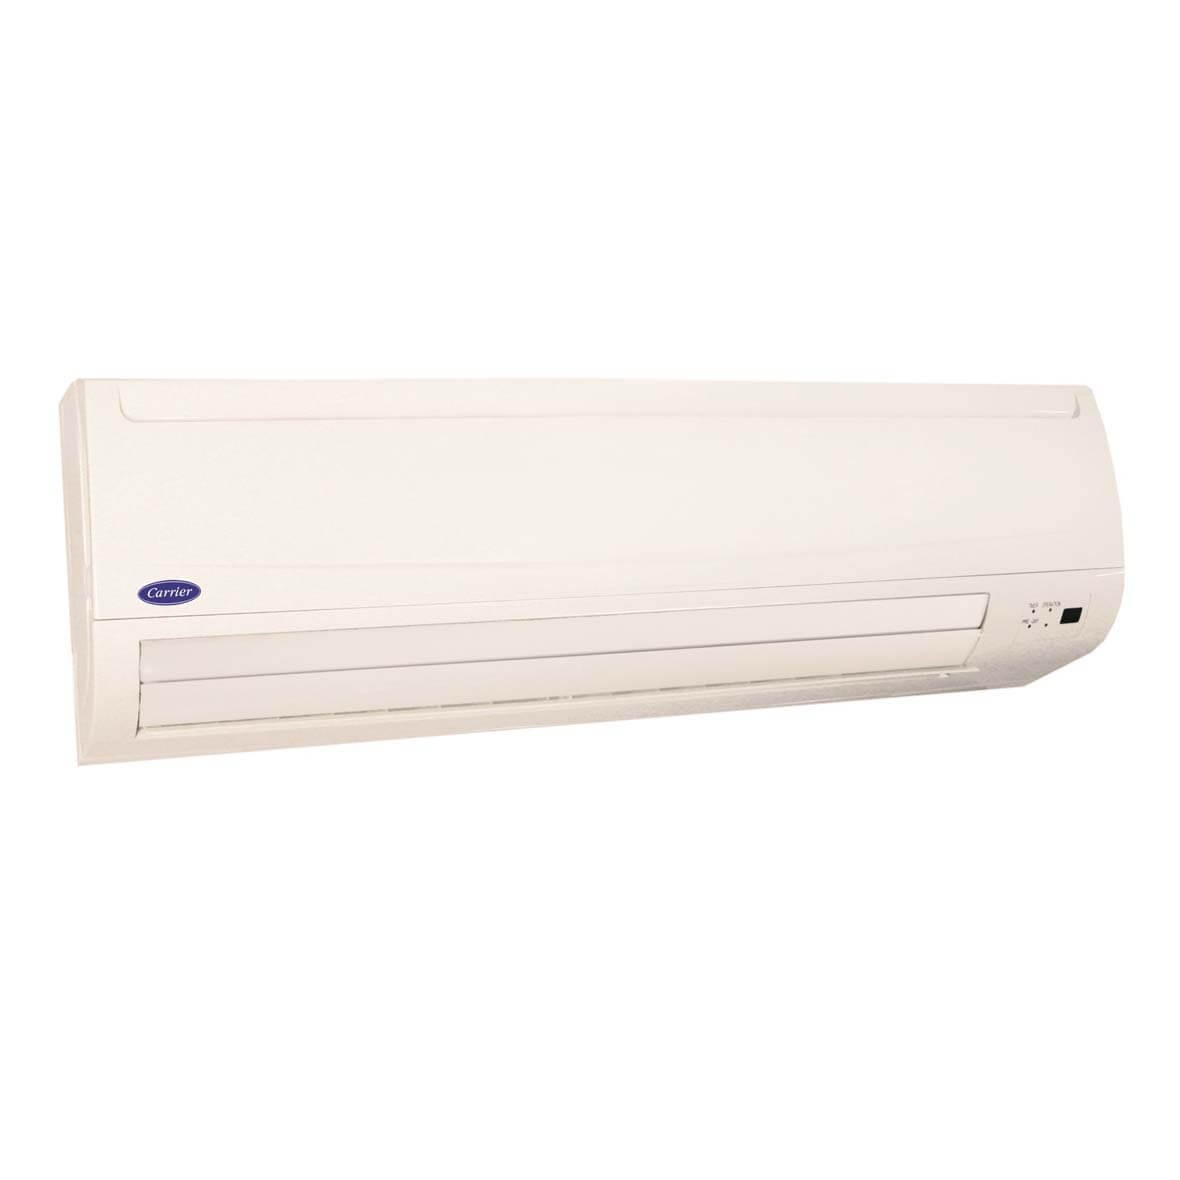 Comfort™ Residential Ductless Highwall Heat Pump System Model: 38/40MVQ